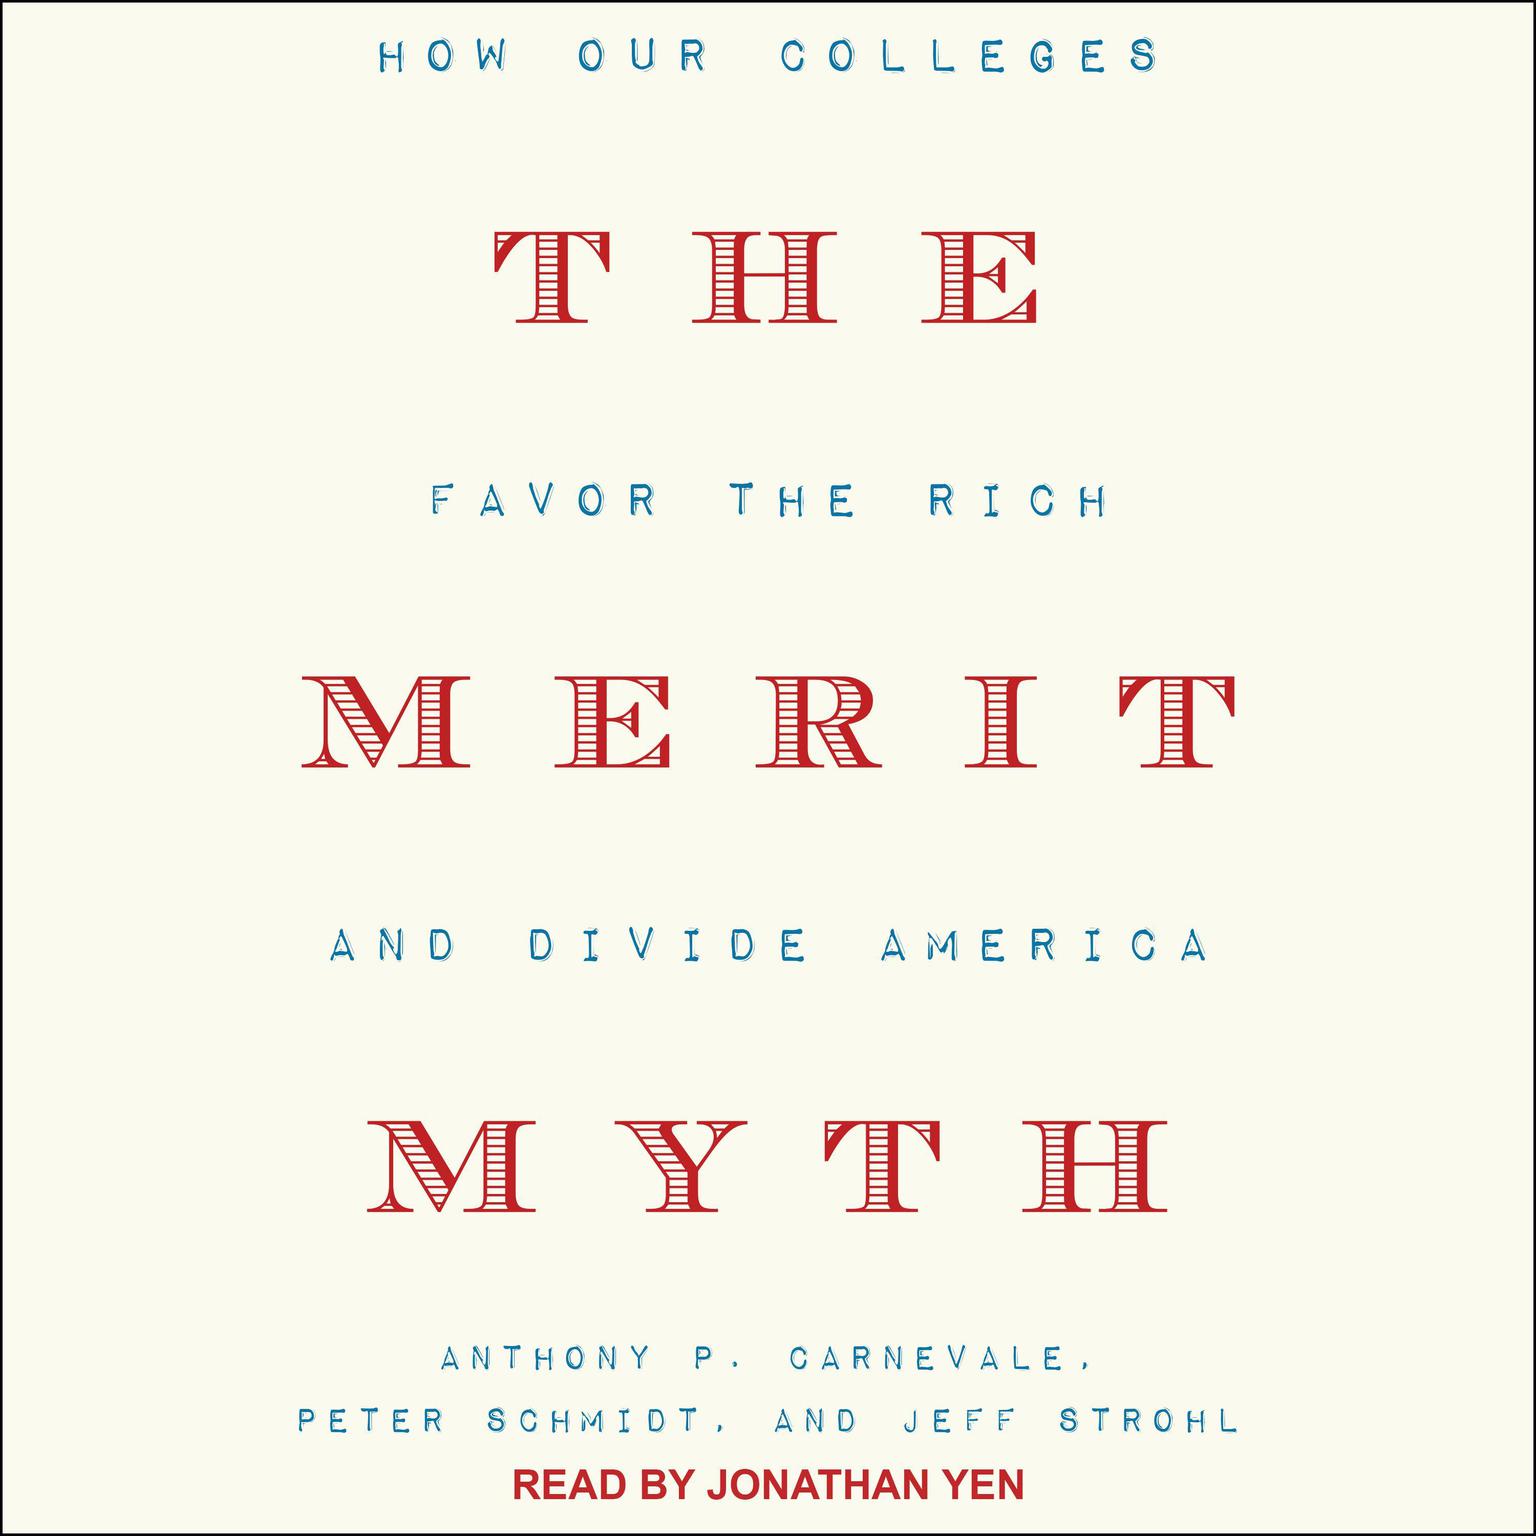 The Merit Myth: How Our Colleges Favor the Rich and Divide America Audiobook, by Anthony P. Carnevale